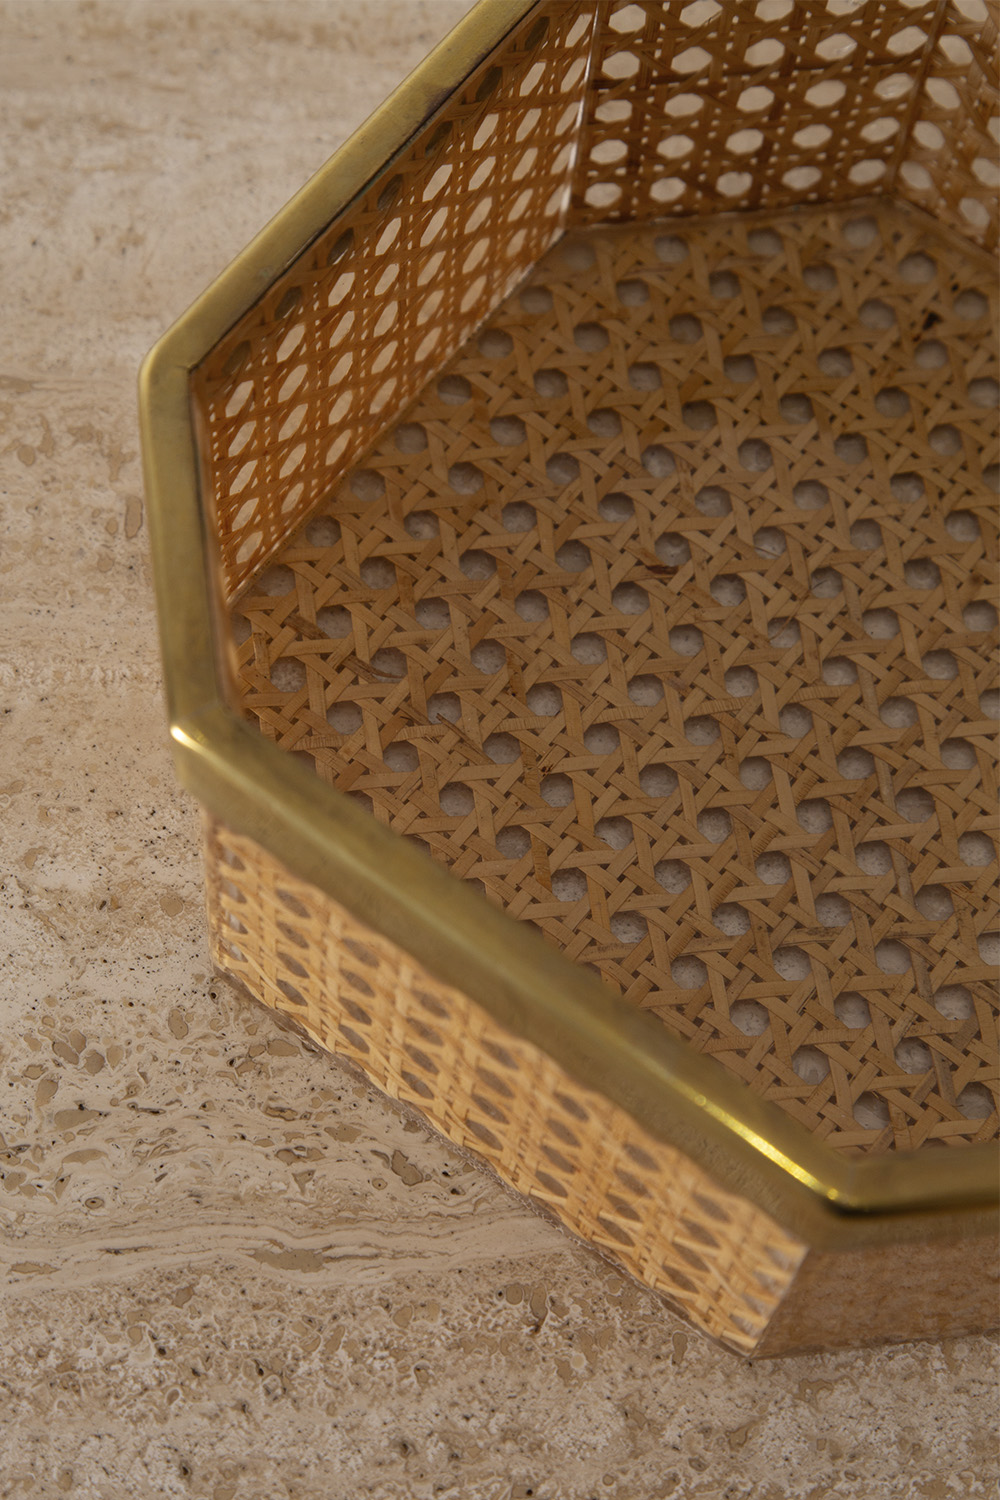 Hexagonal Tray for Christian Dior in Brass , Rattan and Acrylic